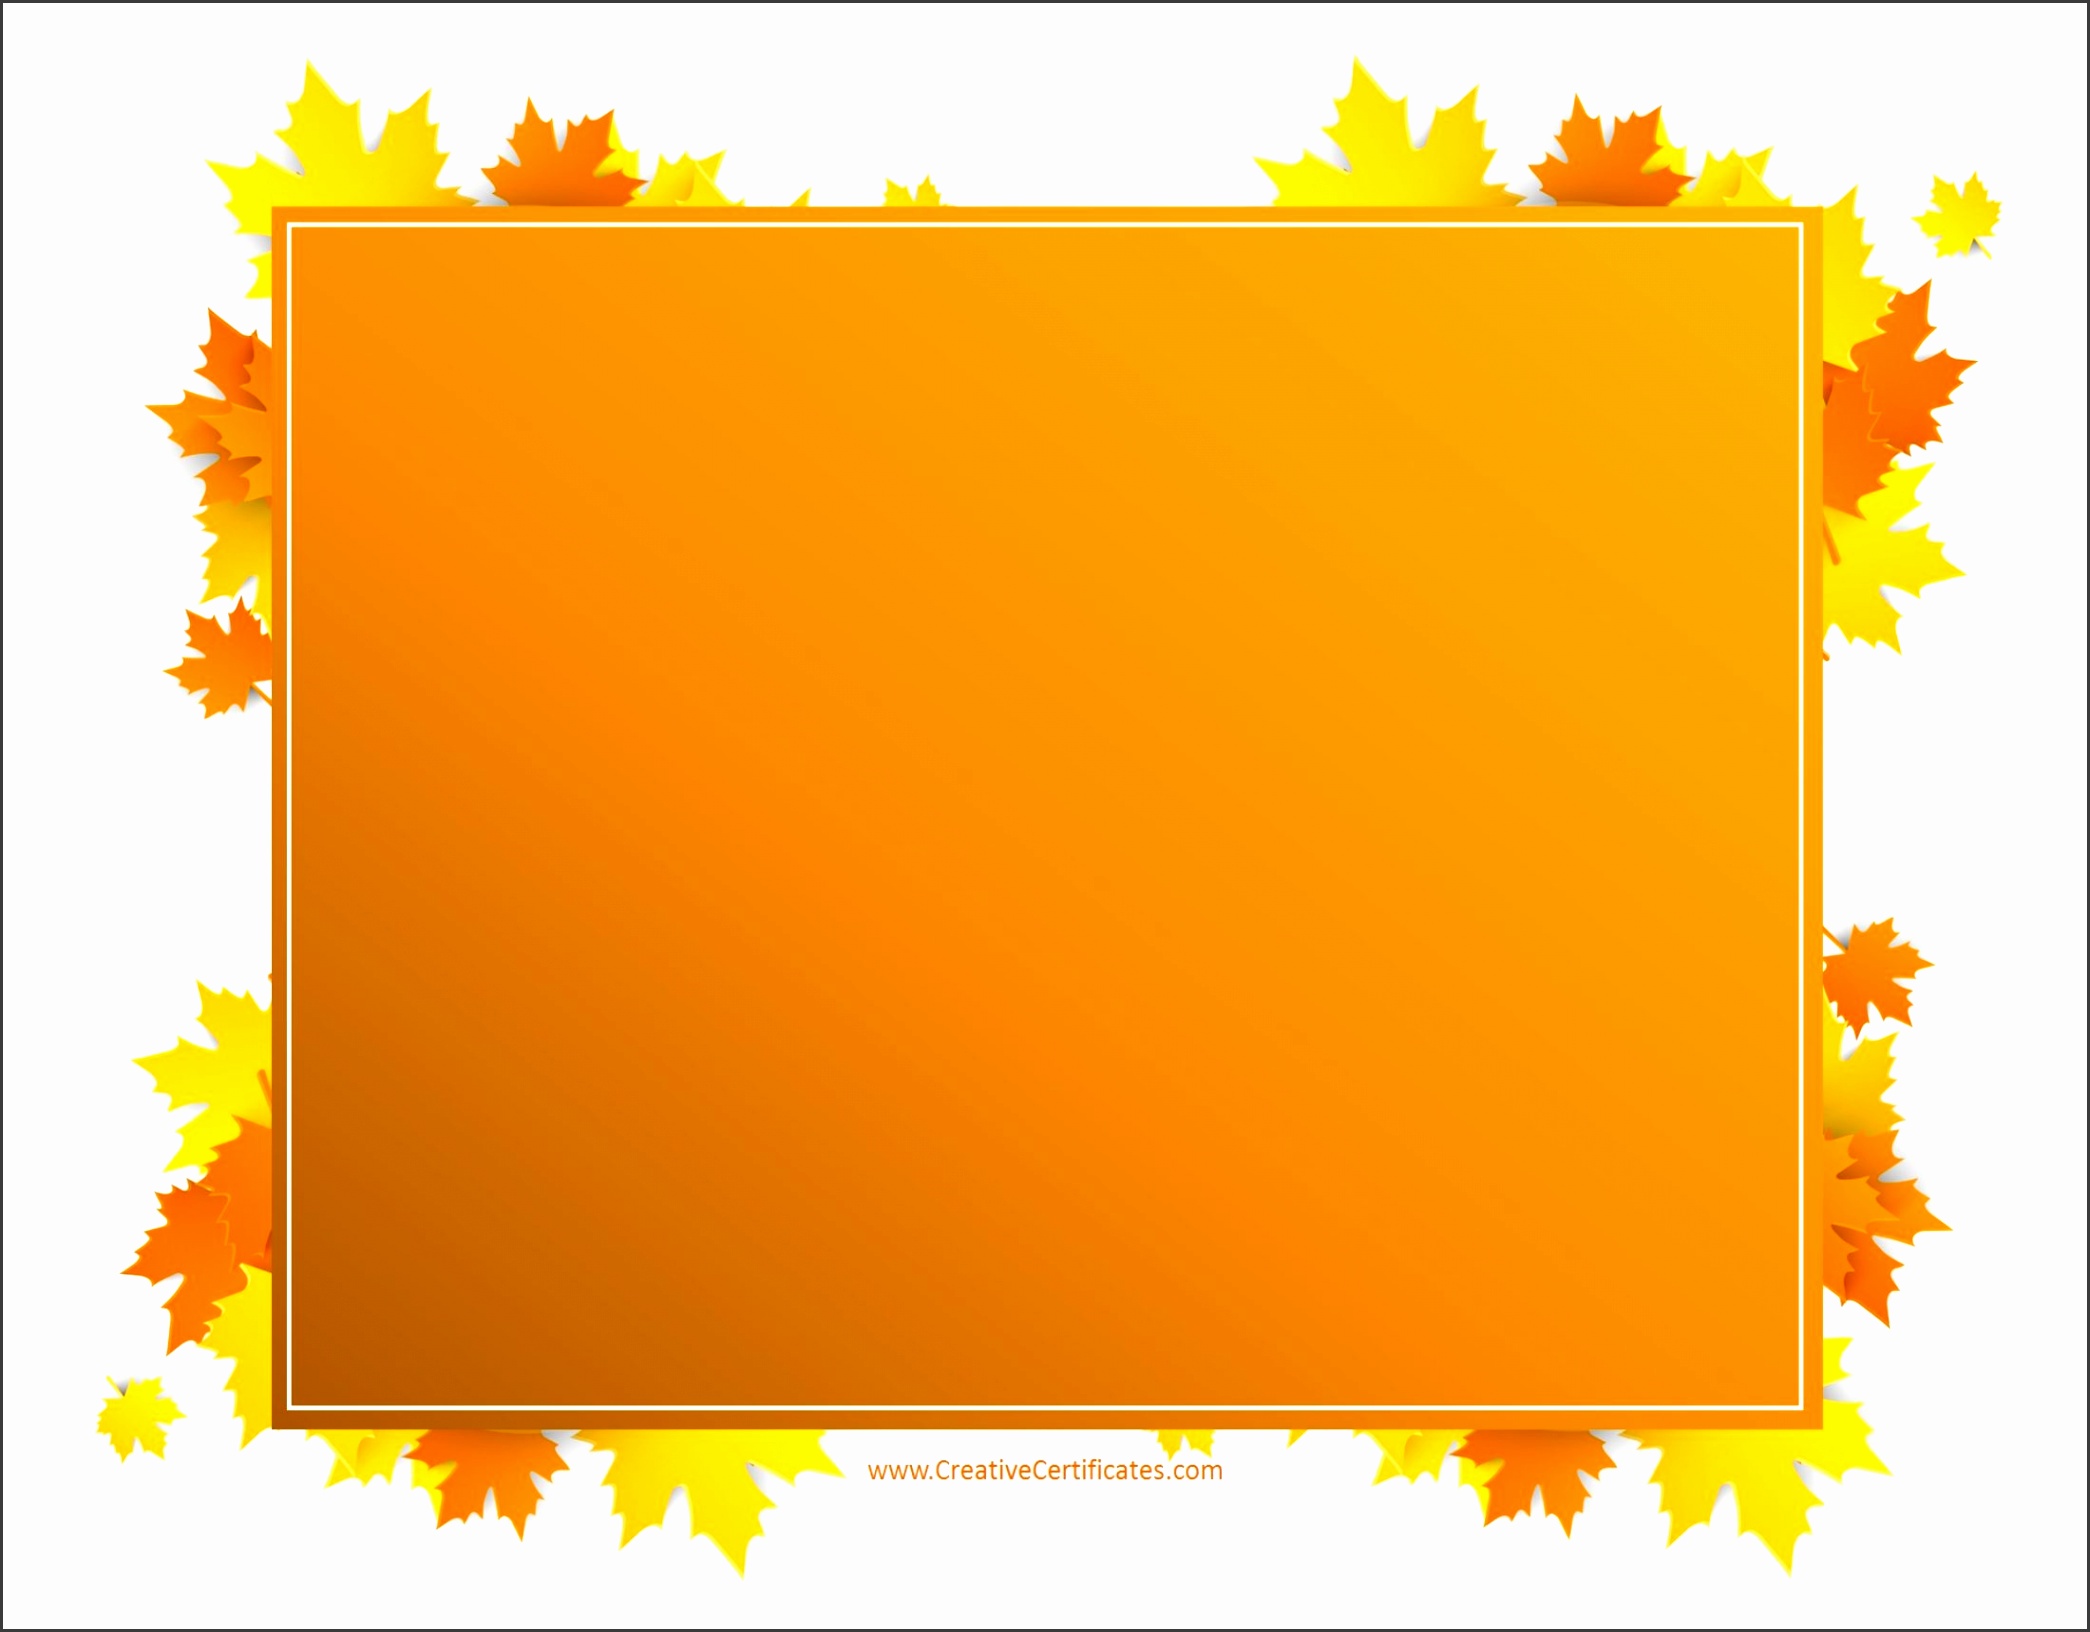 Free printable Thanksgiving border with an orange rectangle and leaves around it